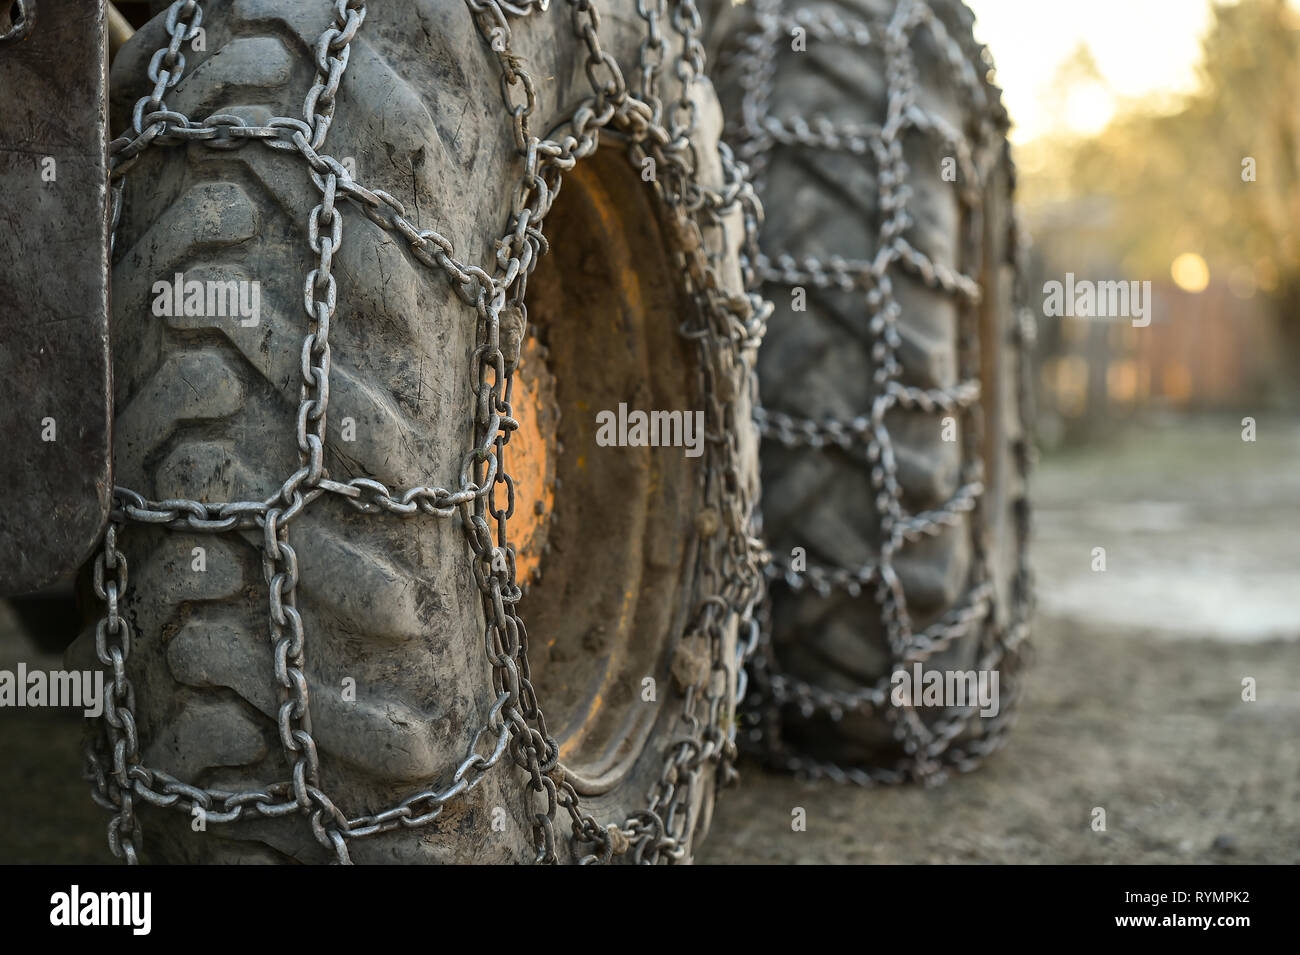 Photo detail with snow tire chains on big truck wheel Stock Photo